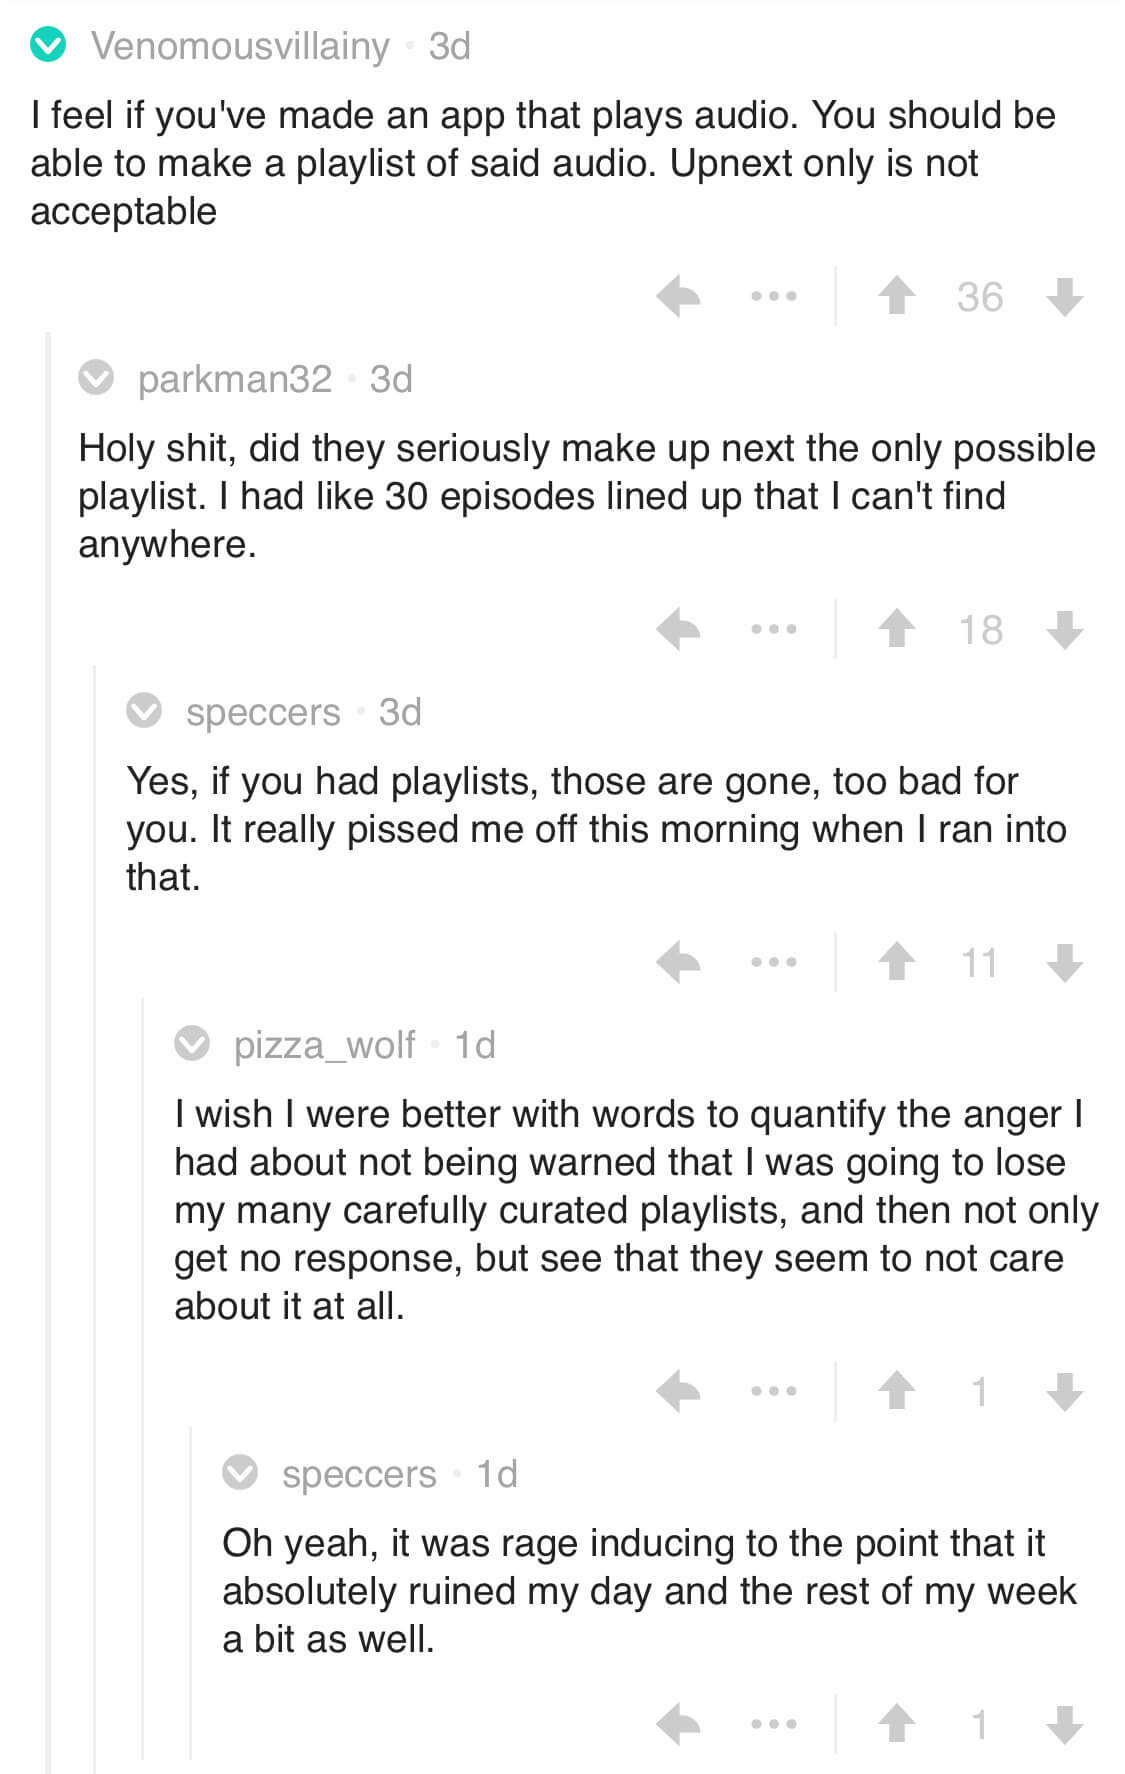 Reddit users expressing their frustrations with the version 7 update of the Pocket Casts app.